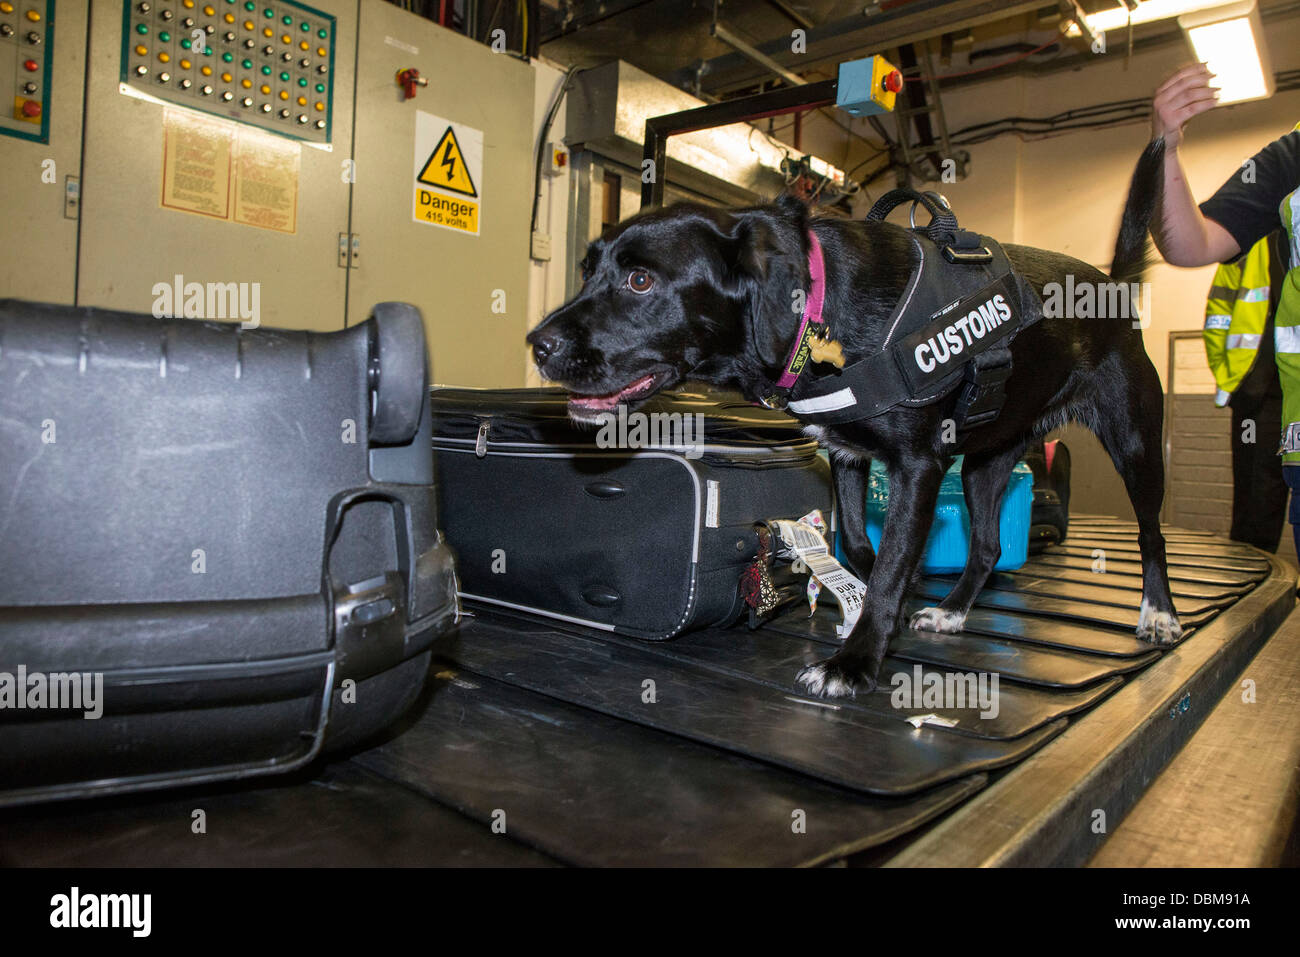 how do sniffer dogs work